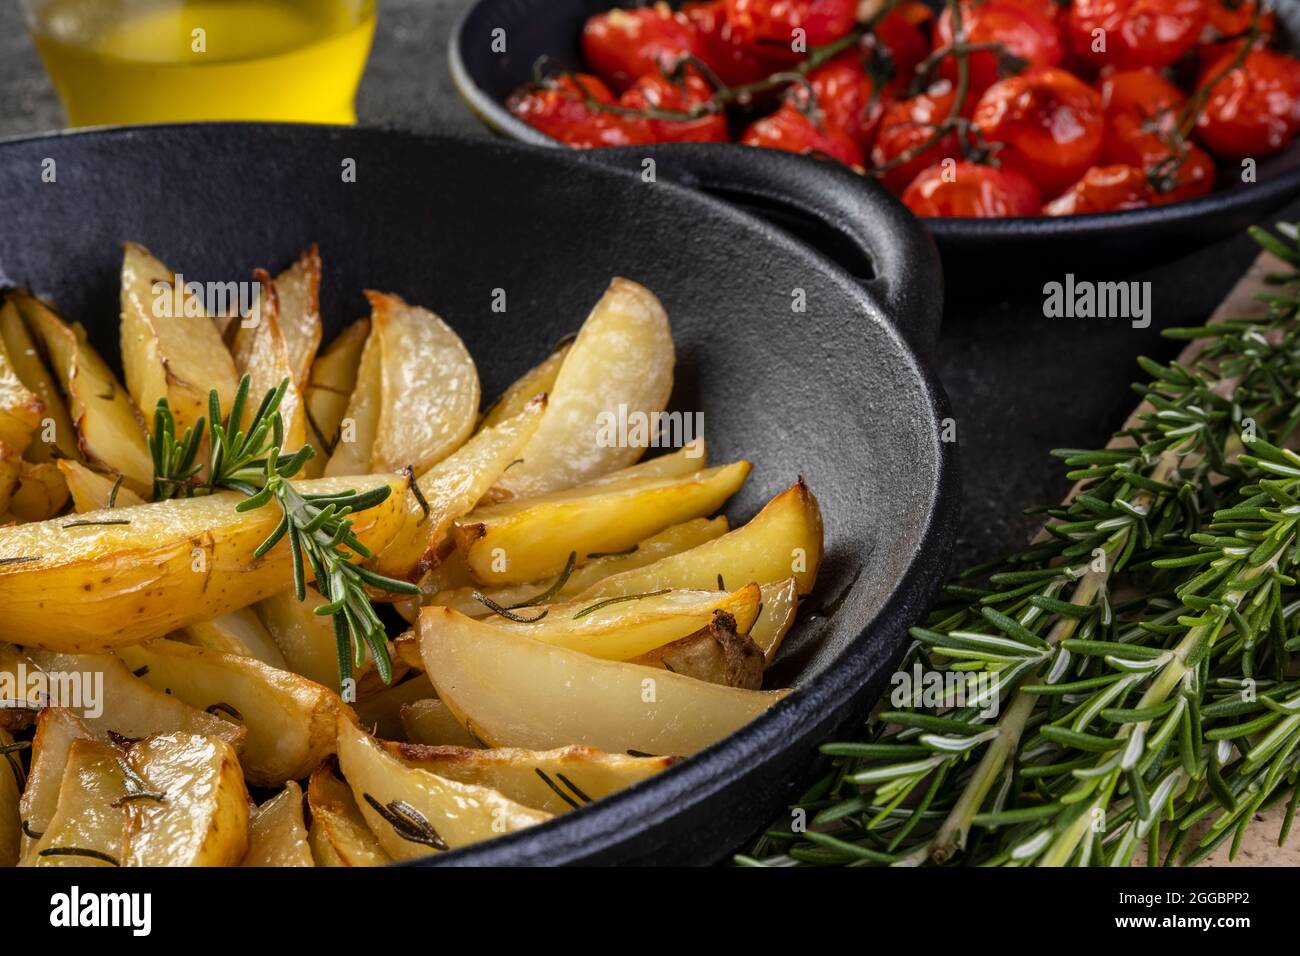 https://c8.alamy.com/comp/2GGBPP2/roasted-potatoes-with-rosemary-in-iron-casserole-and-plate-of-confit-tomatoes-on-dark-background-2GGBPP2.jpg